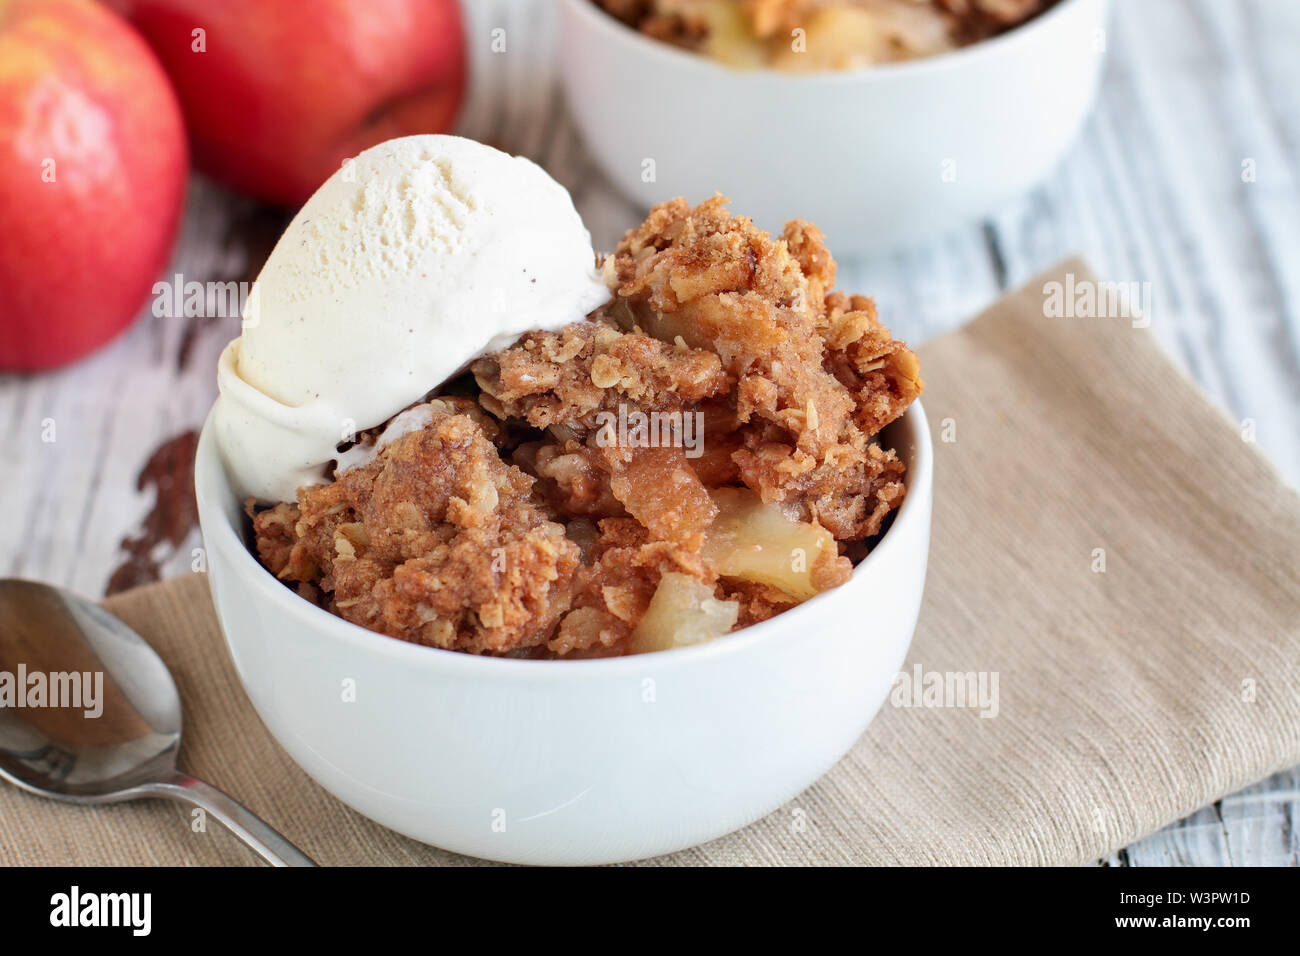 Fresh hot homemade apple crisp or crumble with crunchy streusel topping topped with vanilla bean ice cream. Selective focus with blurred background. Stock Photo